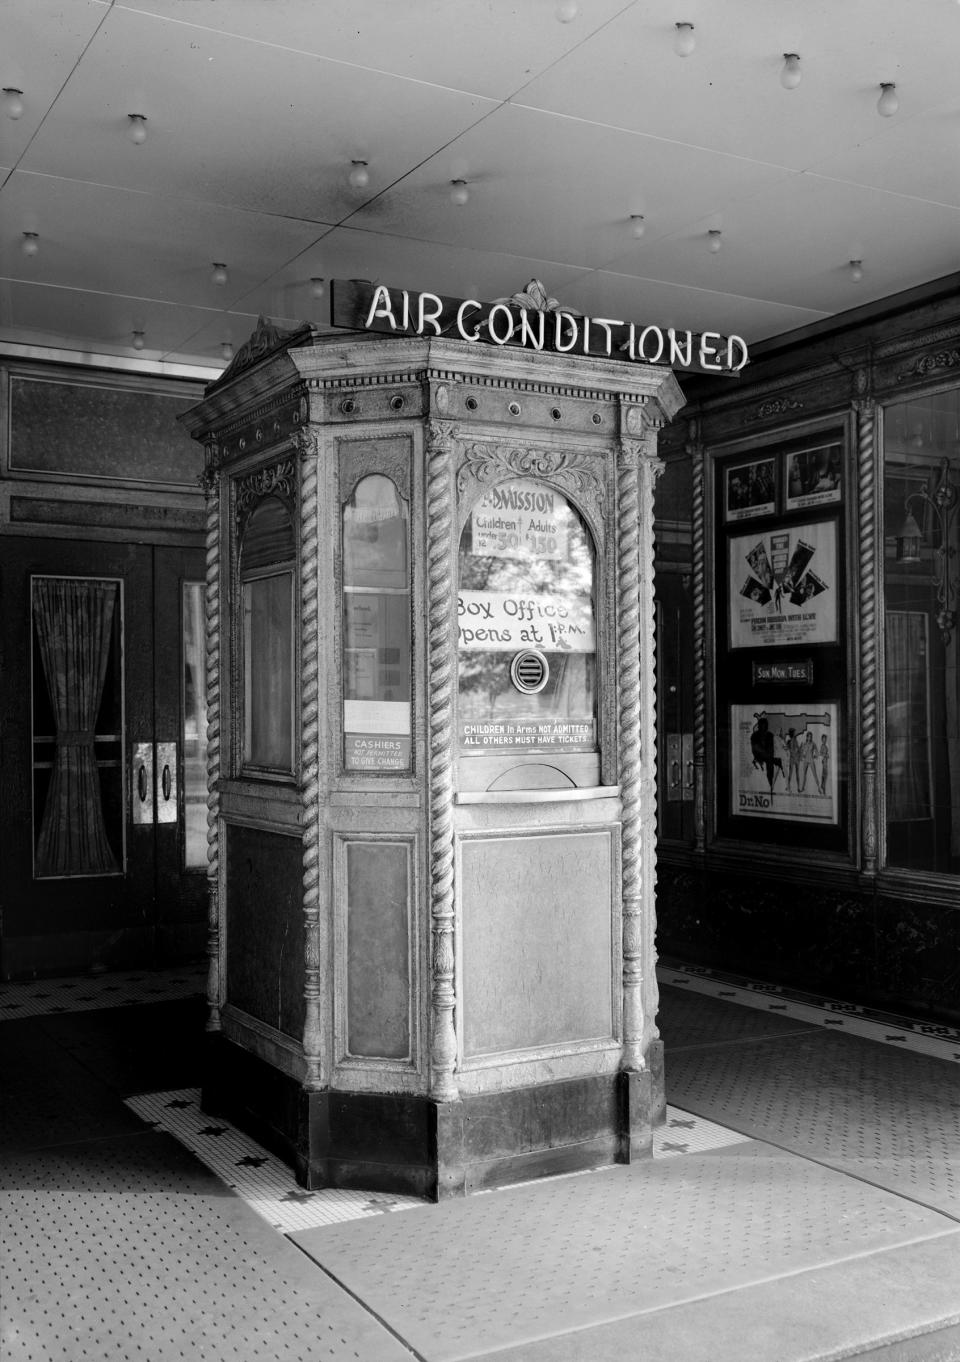 A theater's lobby advertises air conditioning to prospective movie-goers.<span class="copyright">LMPC/Getty Images</span>